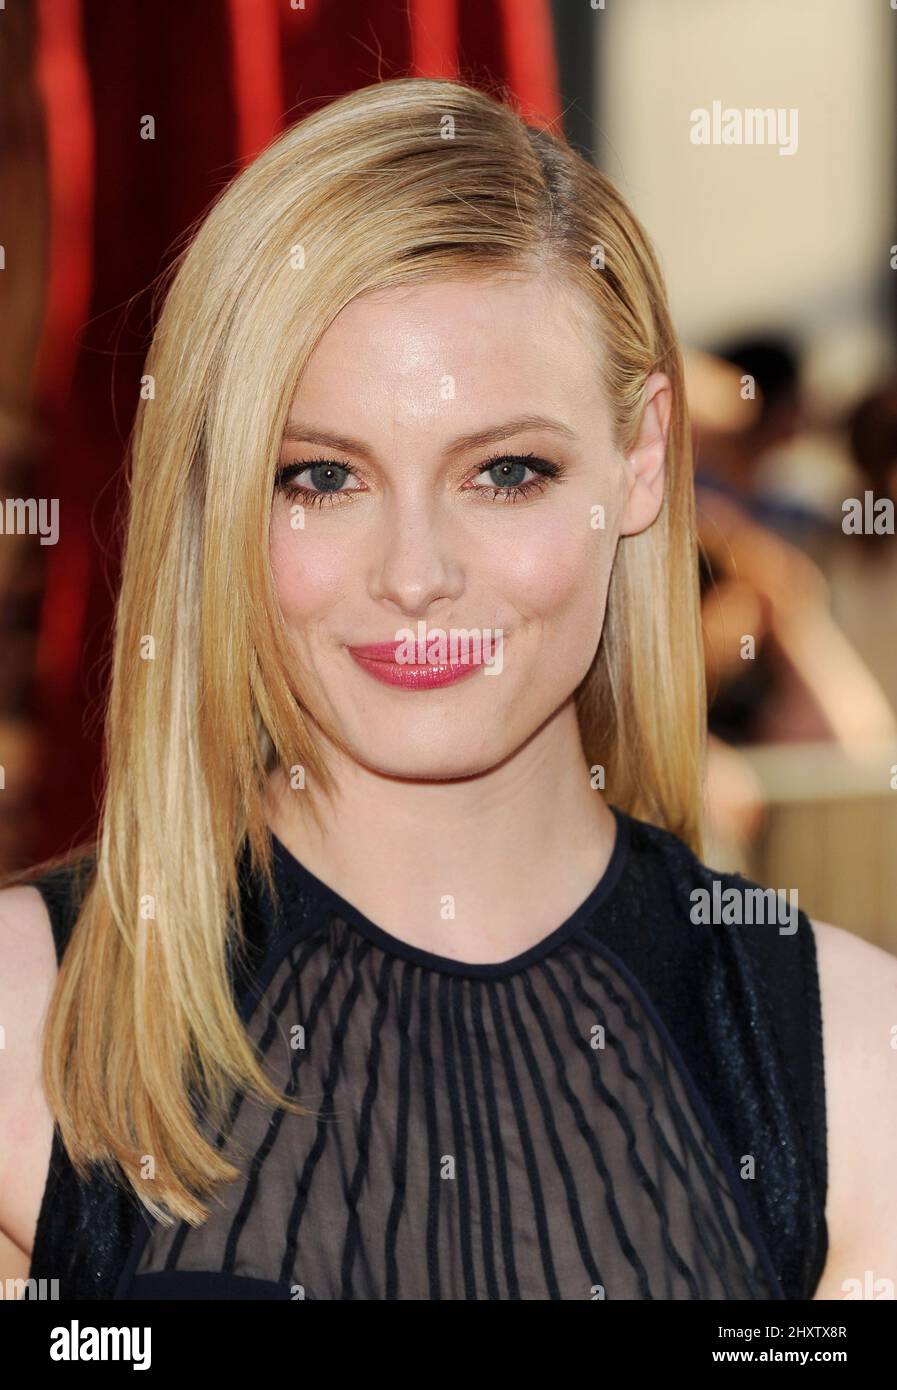 Gillian Jacobs arriving at the Los Angeles Premiere of 'Thor' at the El Capitan Theater on May 2, 2011 in Hollywood, USA. Stock Photo